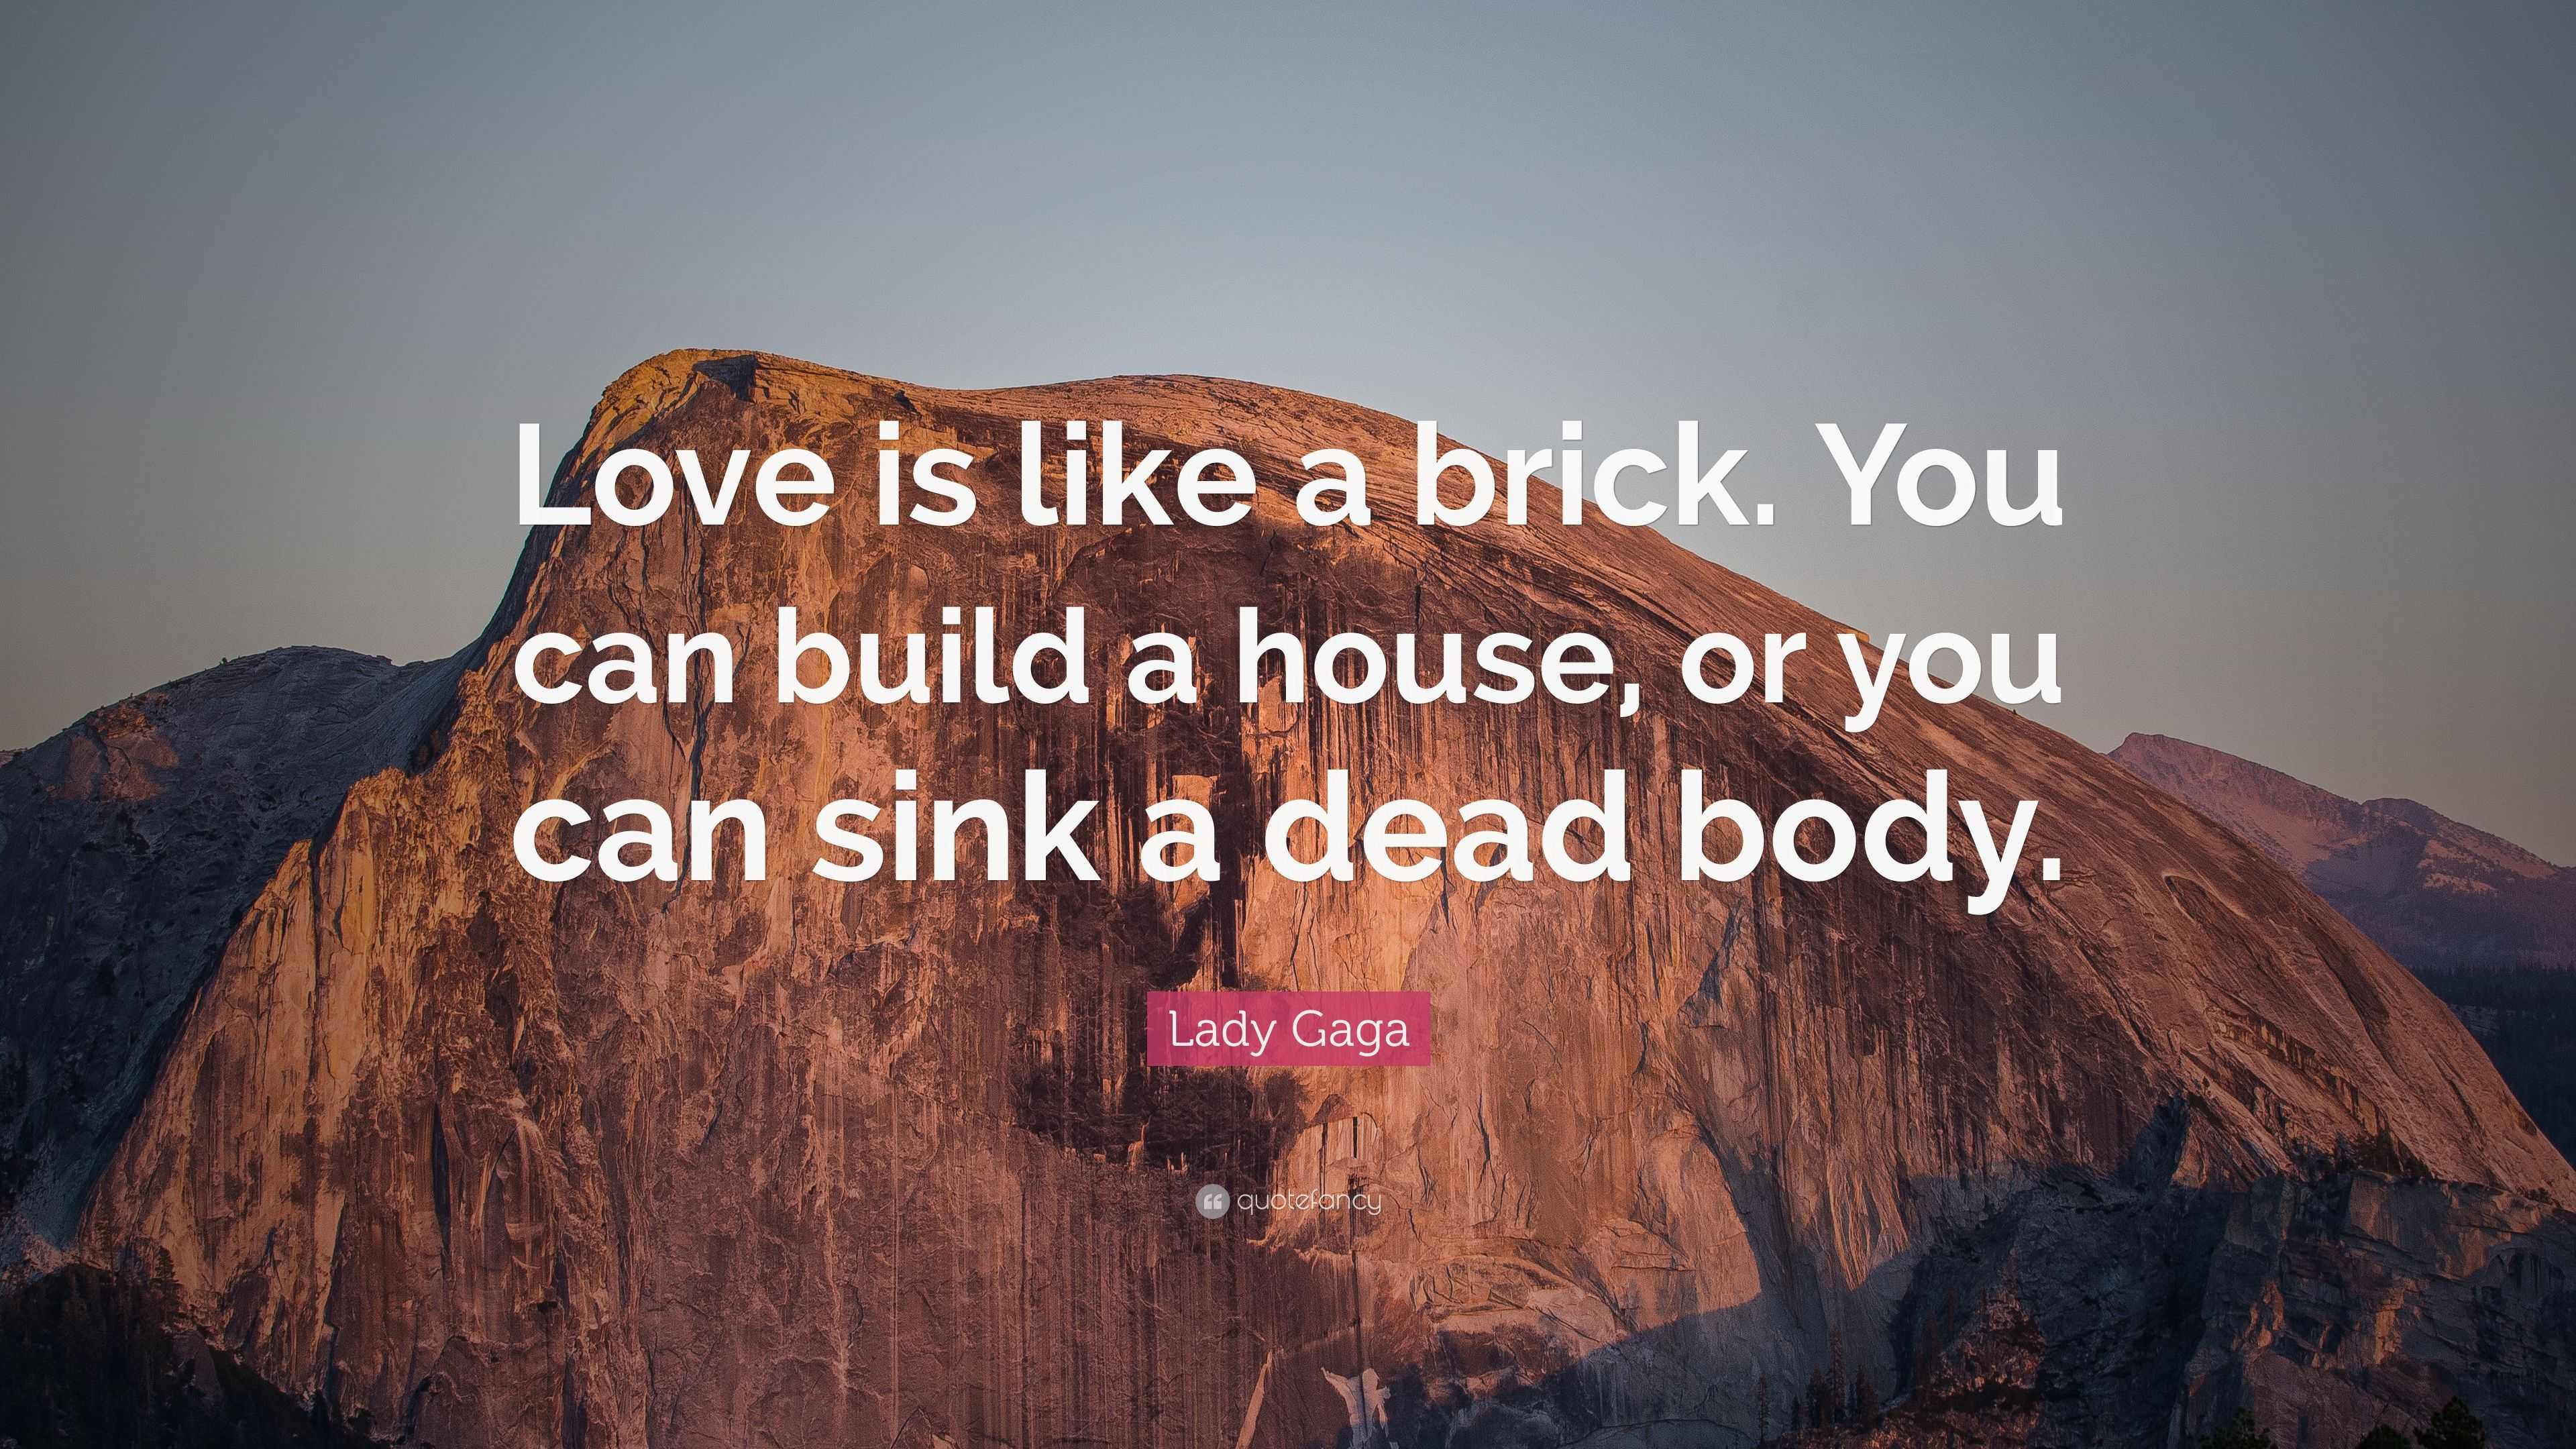 Lady Gaga Quote “Love is like a brick You can build a house